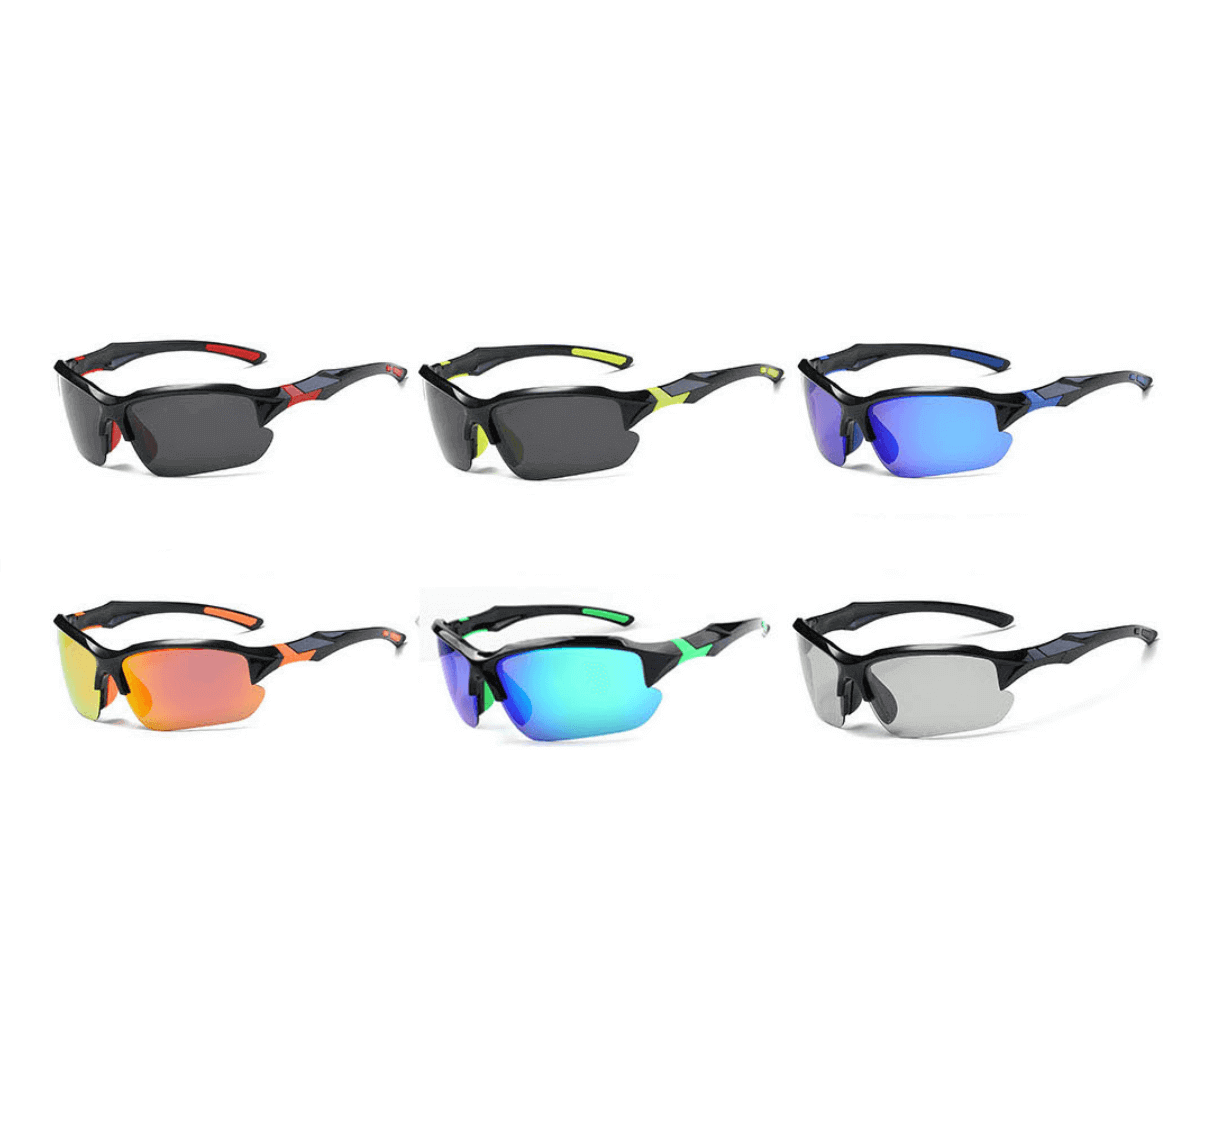 Wholesale Sports Sunglasses from China Sunglasses Manufacturer